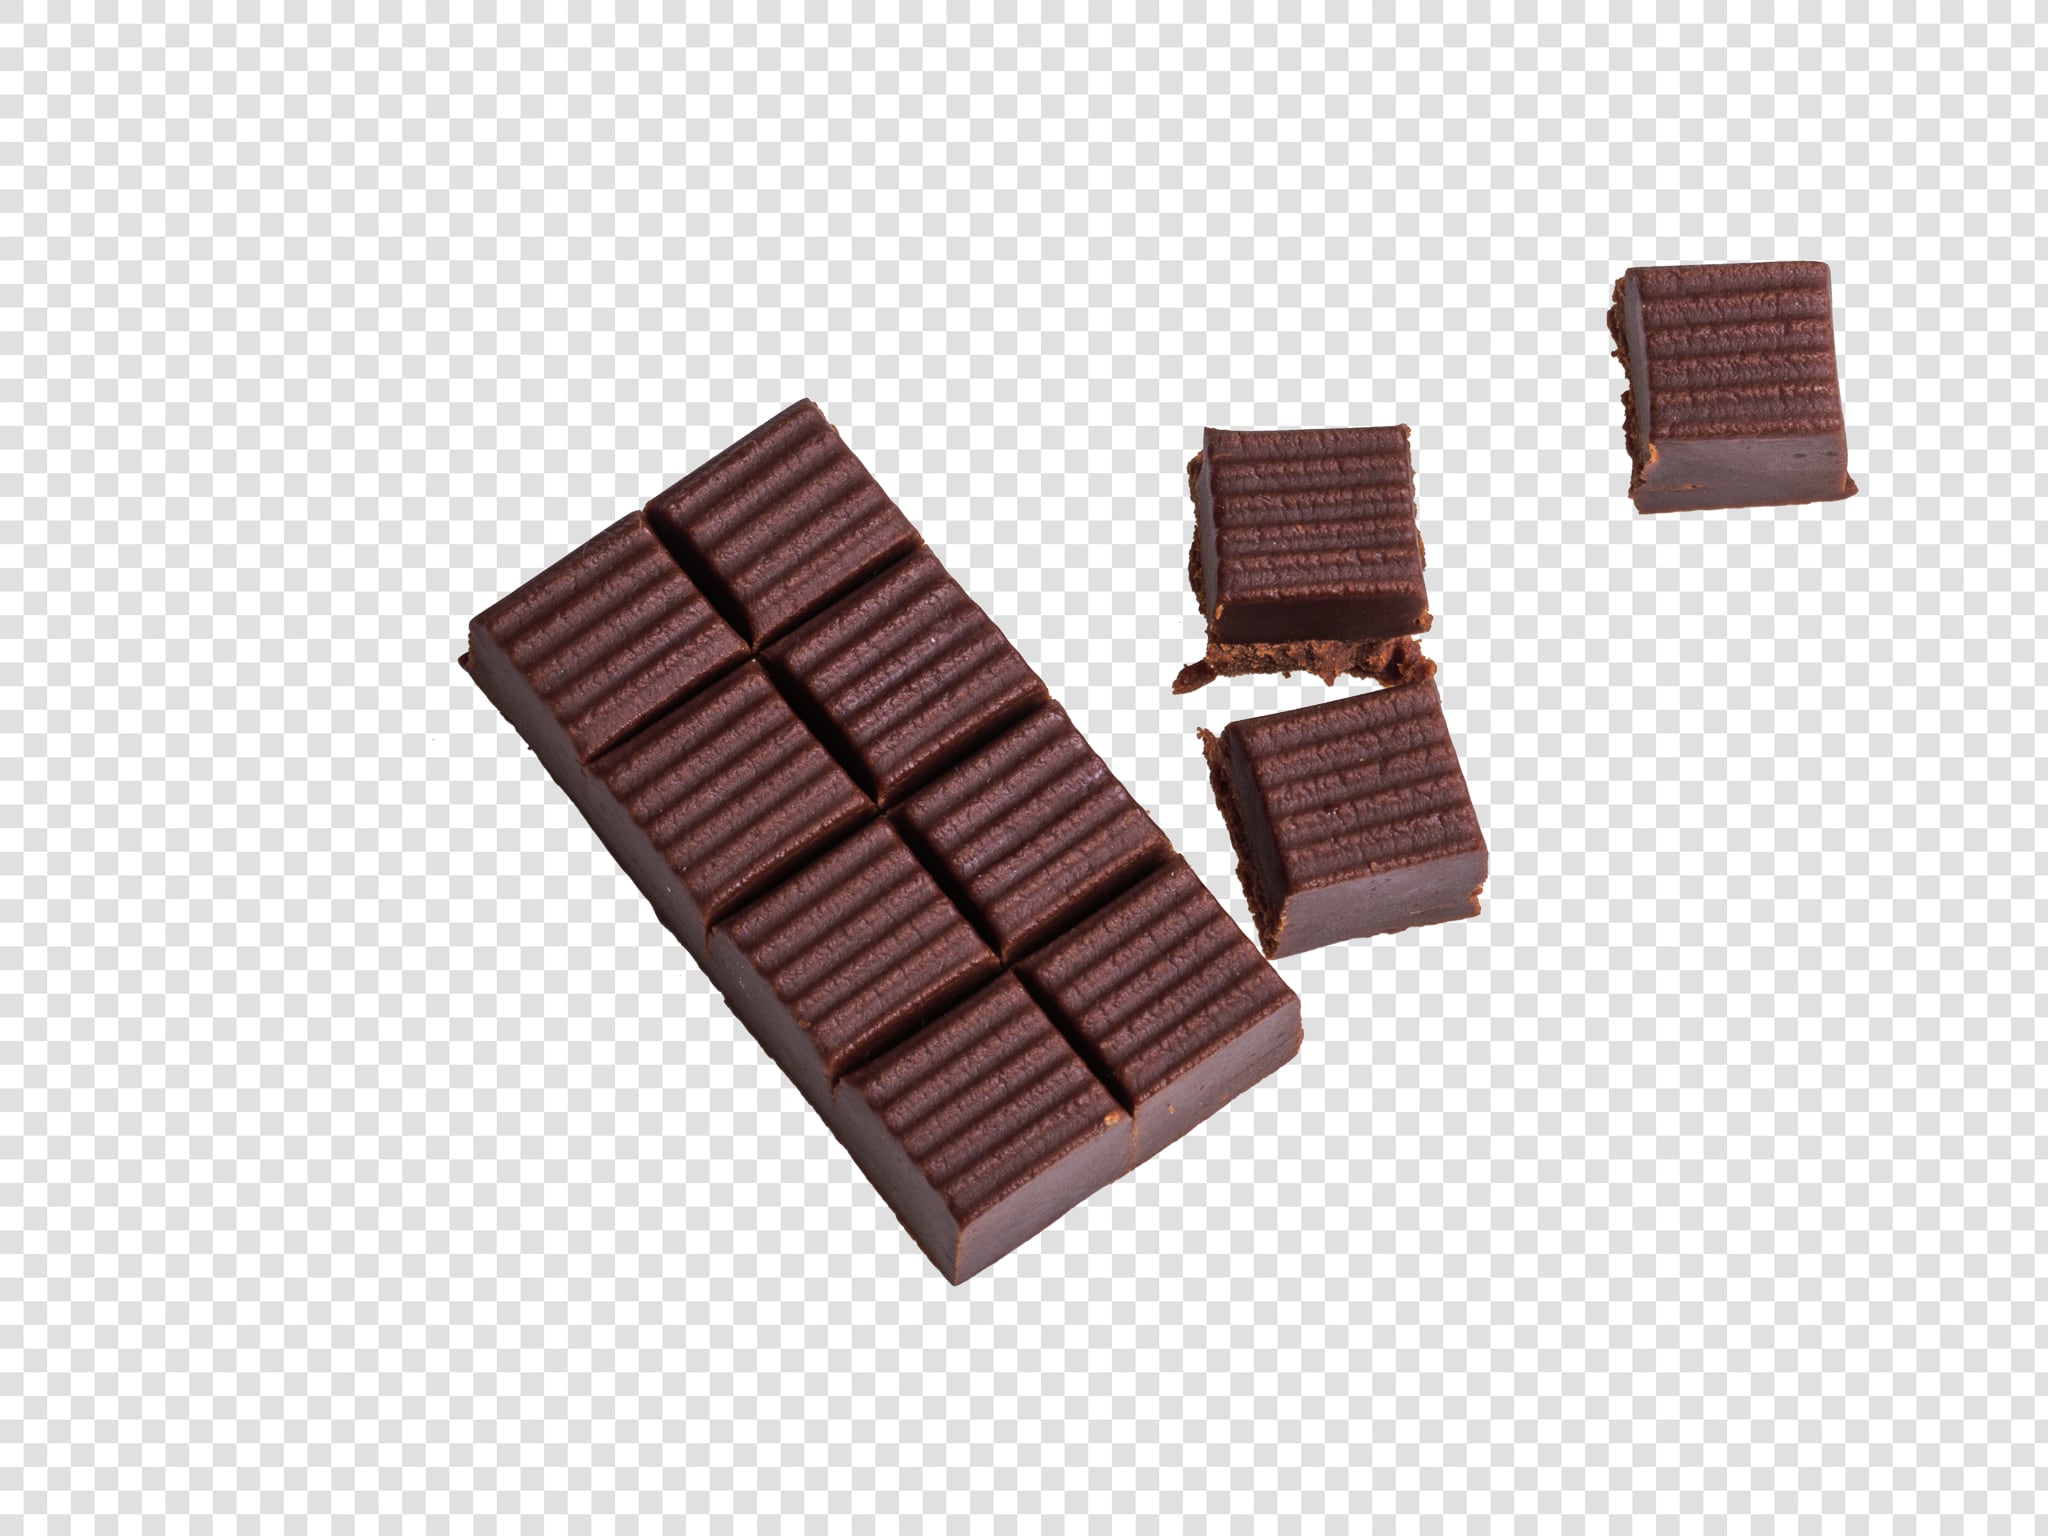 Chocolate image asset with transparent background